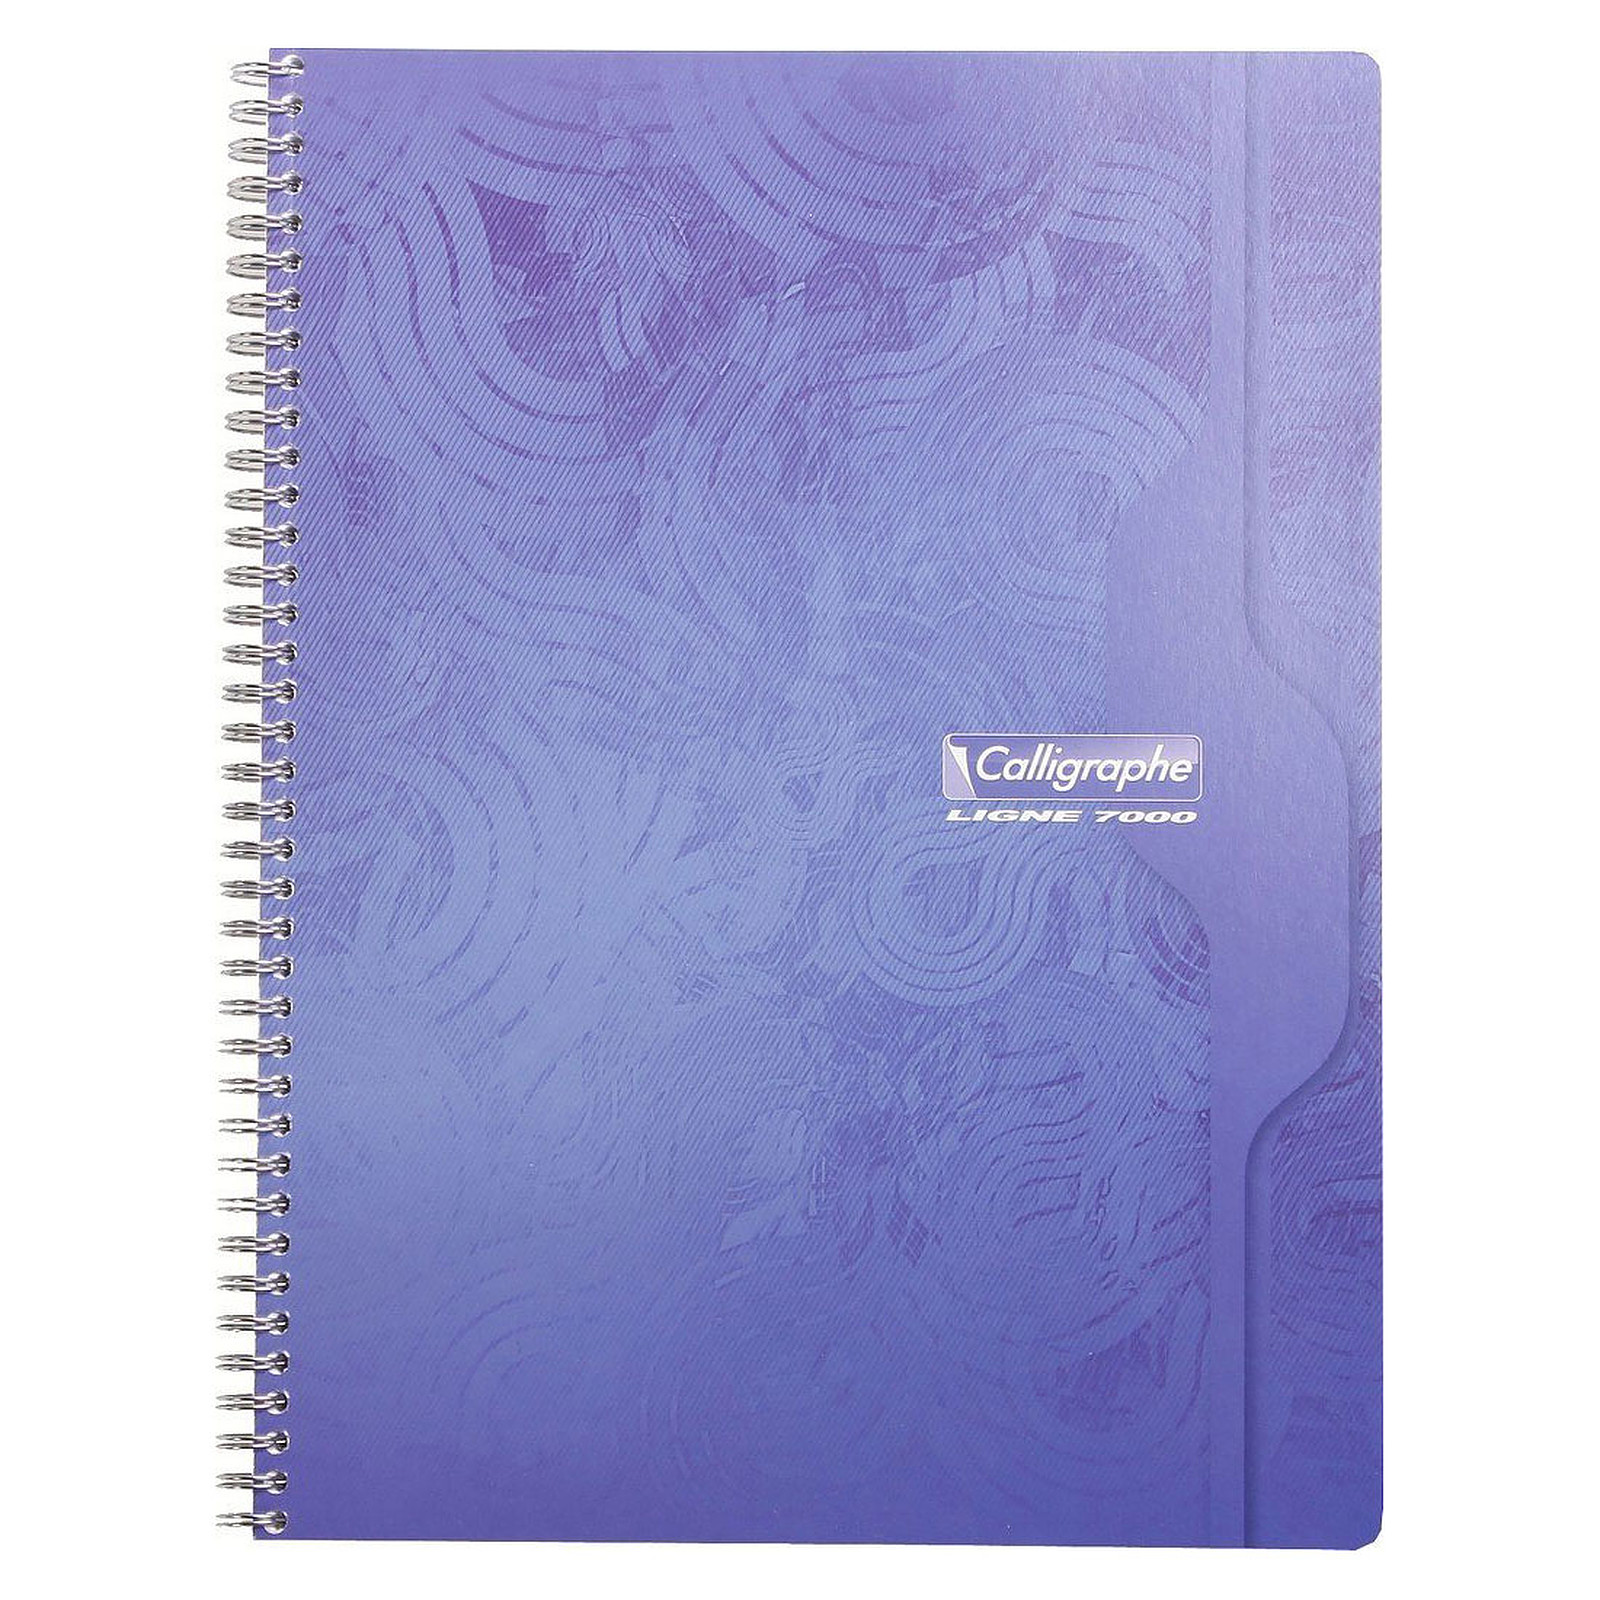 Calligraphe 7000 Cahier A4+ 180 pages 70g petits carreaux - Cahier Calligraphe